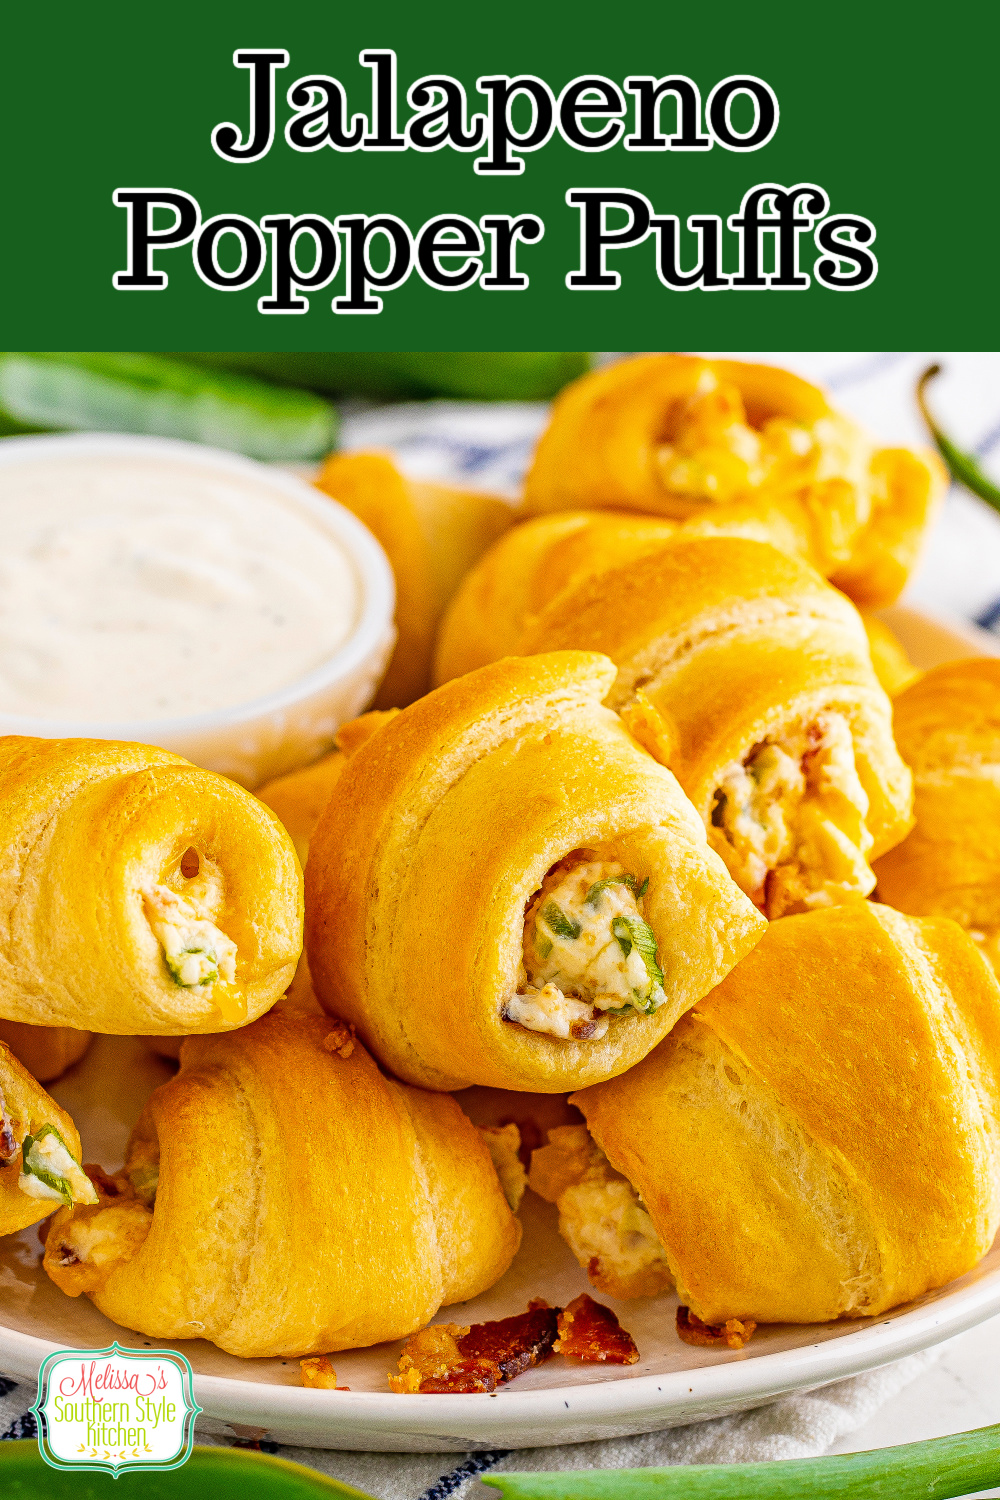 These easy Jalapeno Popper Puffs are stuffed with the same flavors featured in jalapeno poppers wrapped-up in crescent dough. #jalapenopoppers #puffs #bakedjalapenopoppers #crescentrolls #recipesusingcrescentrolls #easypoppersrecipe via @melissasssk